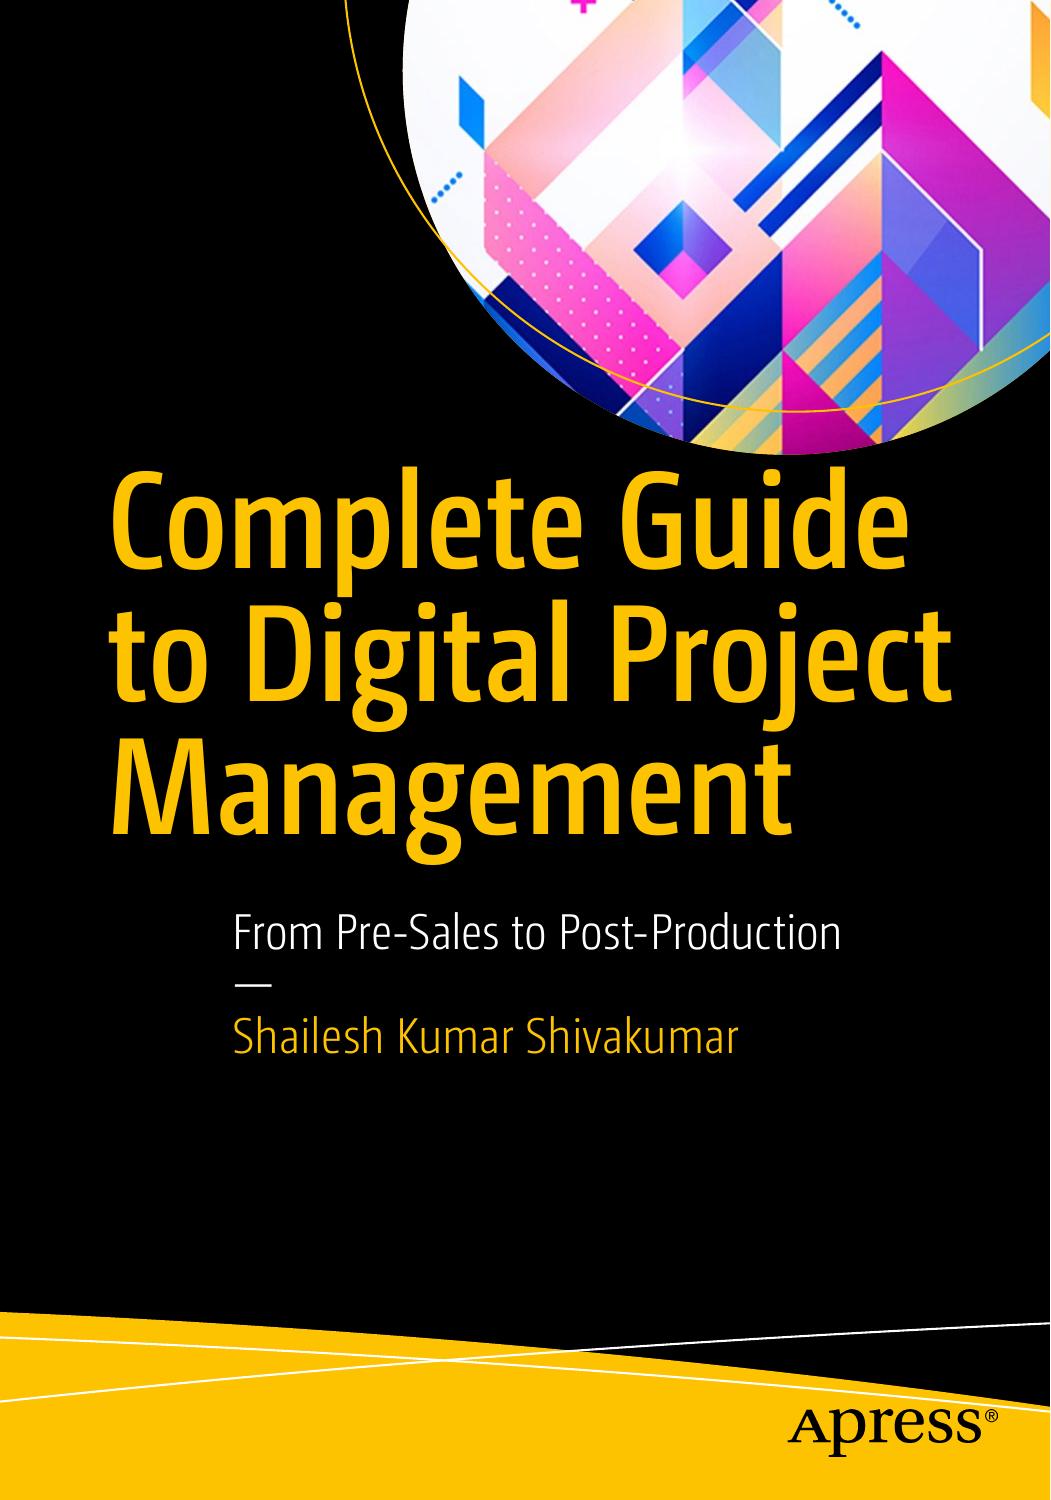 Complete Guide to Digital Project Management  From Pre-Sales to Post-Production ( PDFDrive ) 2018